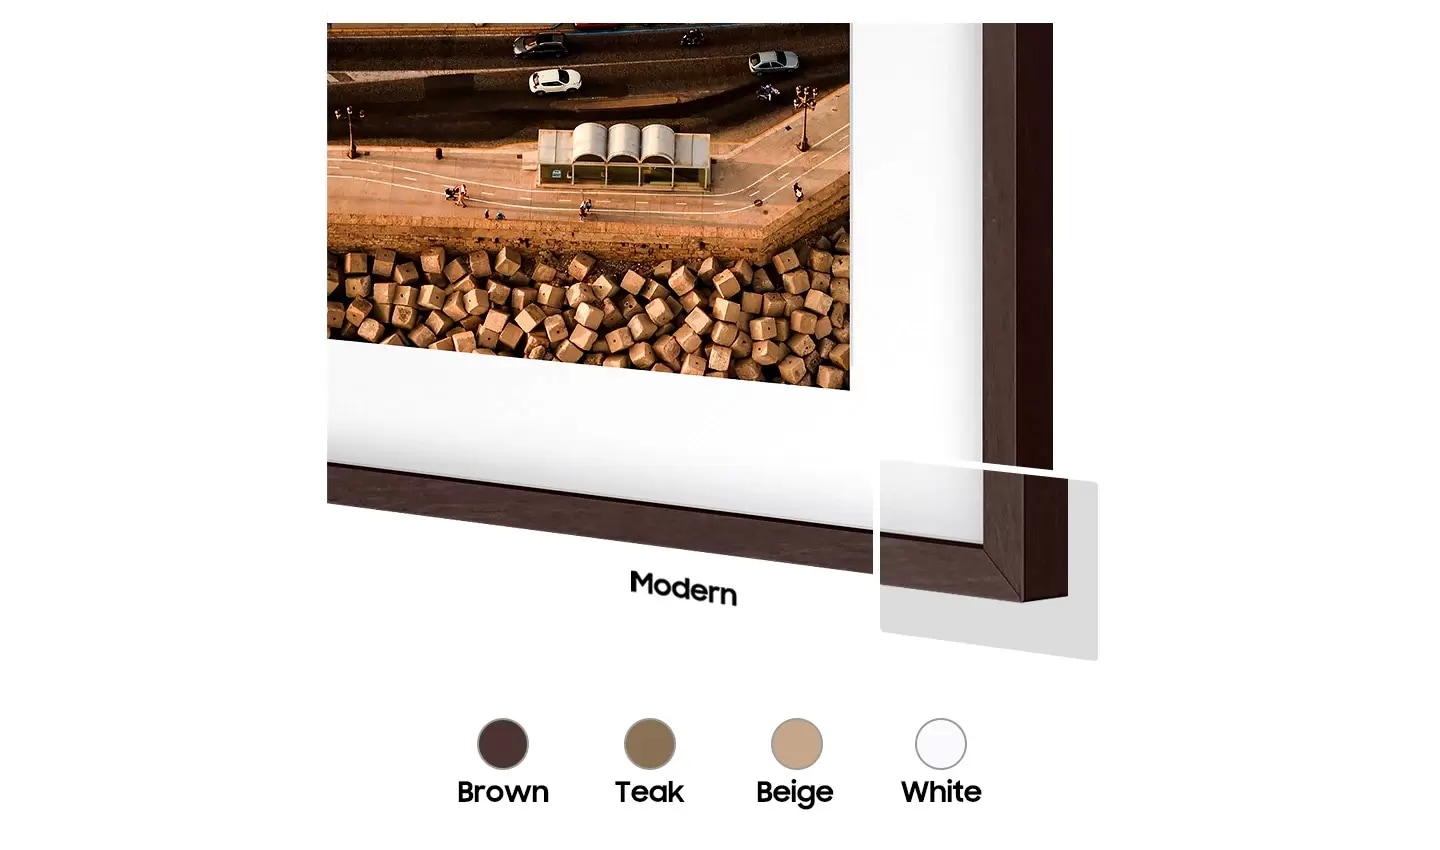 Modern type offer users a choice of contemporary frame style. Colour chips for Brown, Teak, and White are shown.